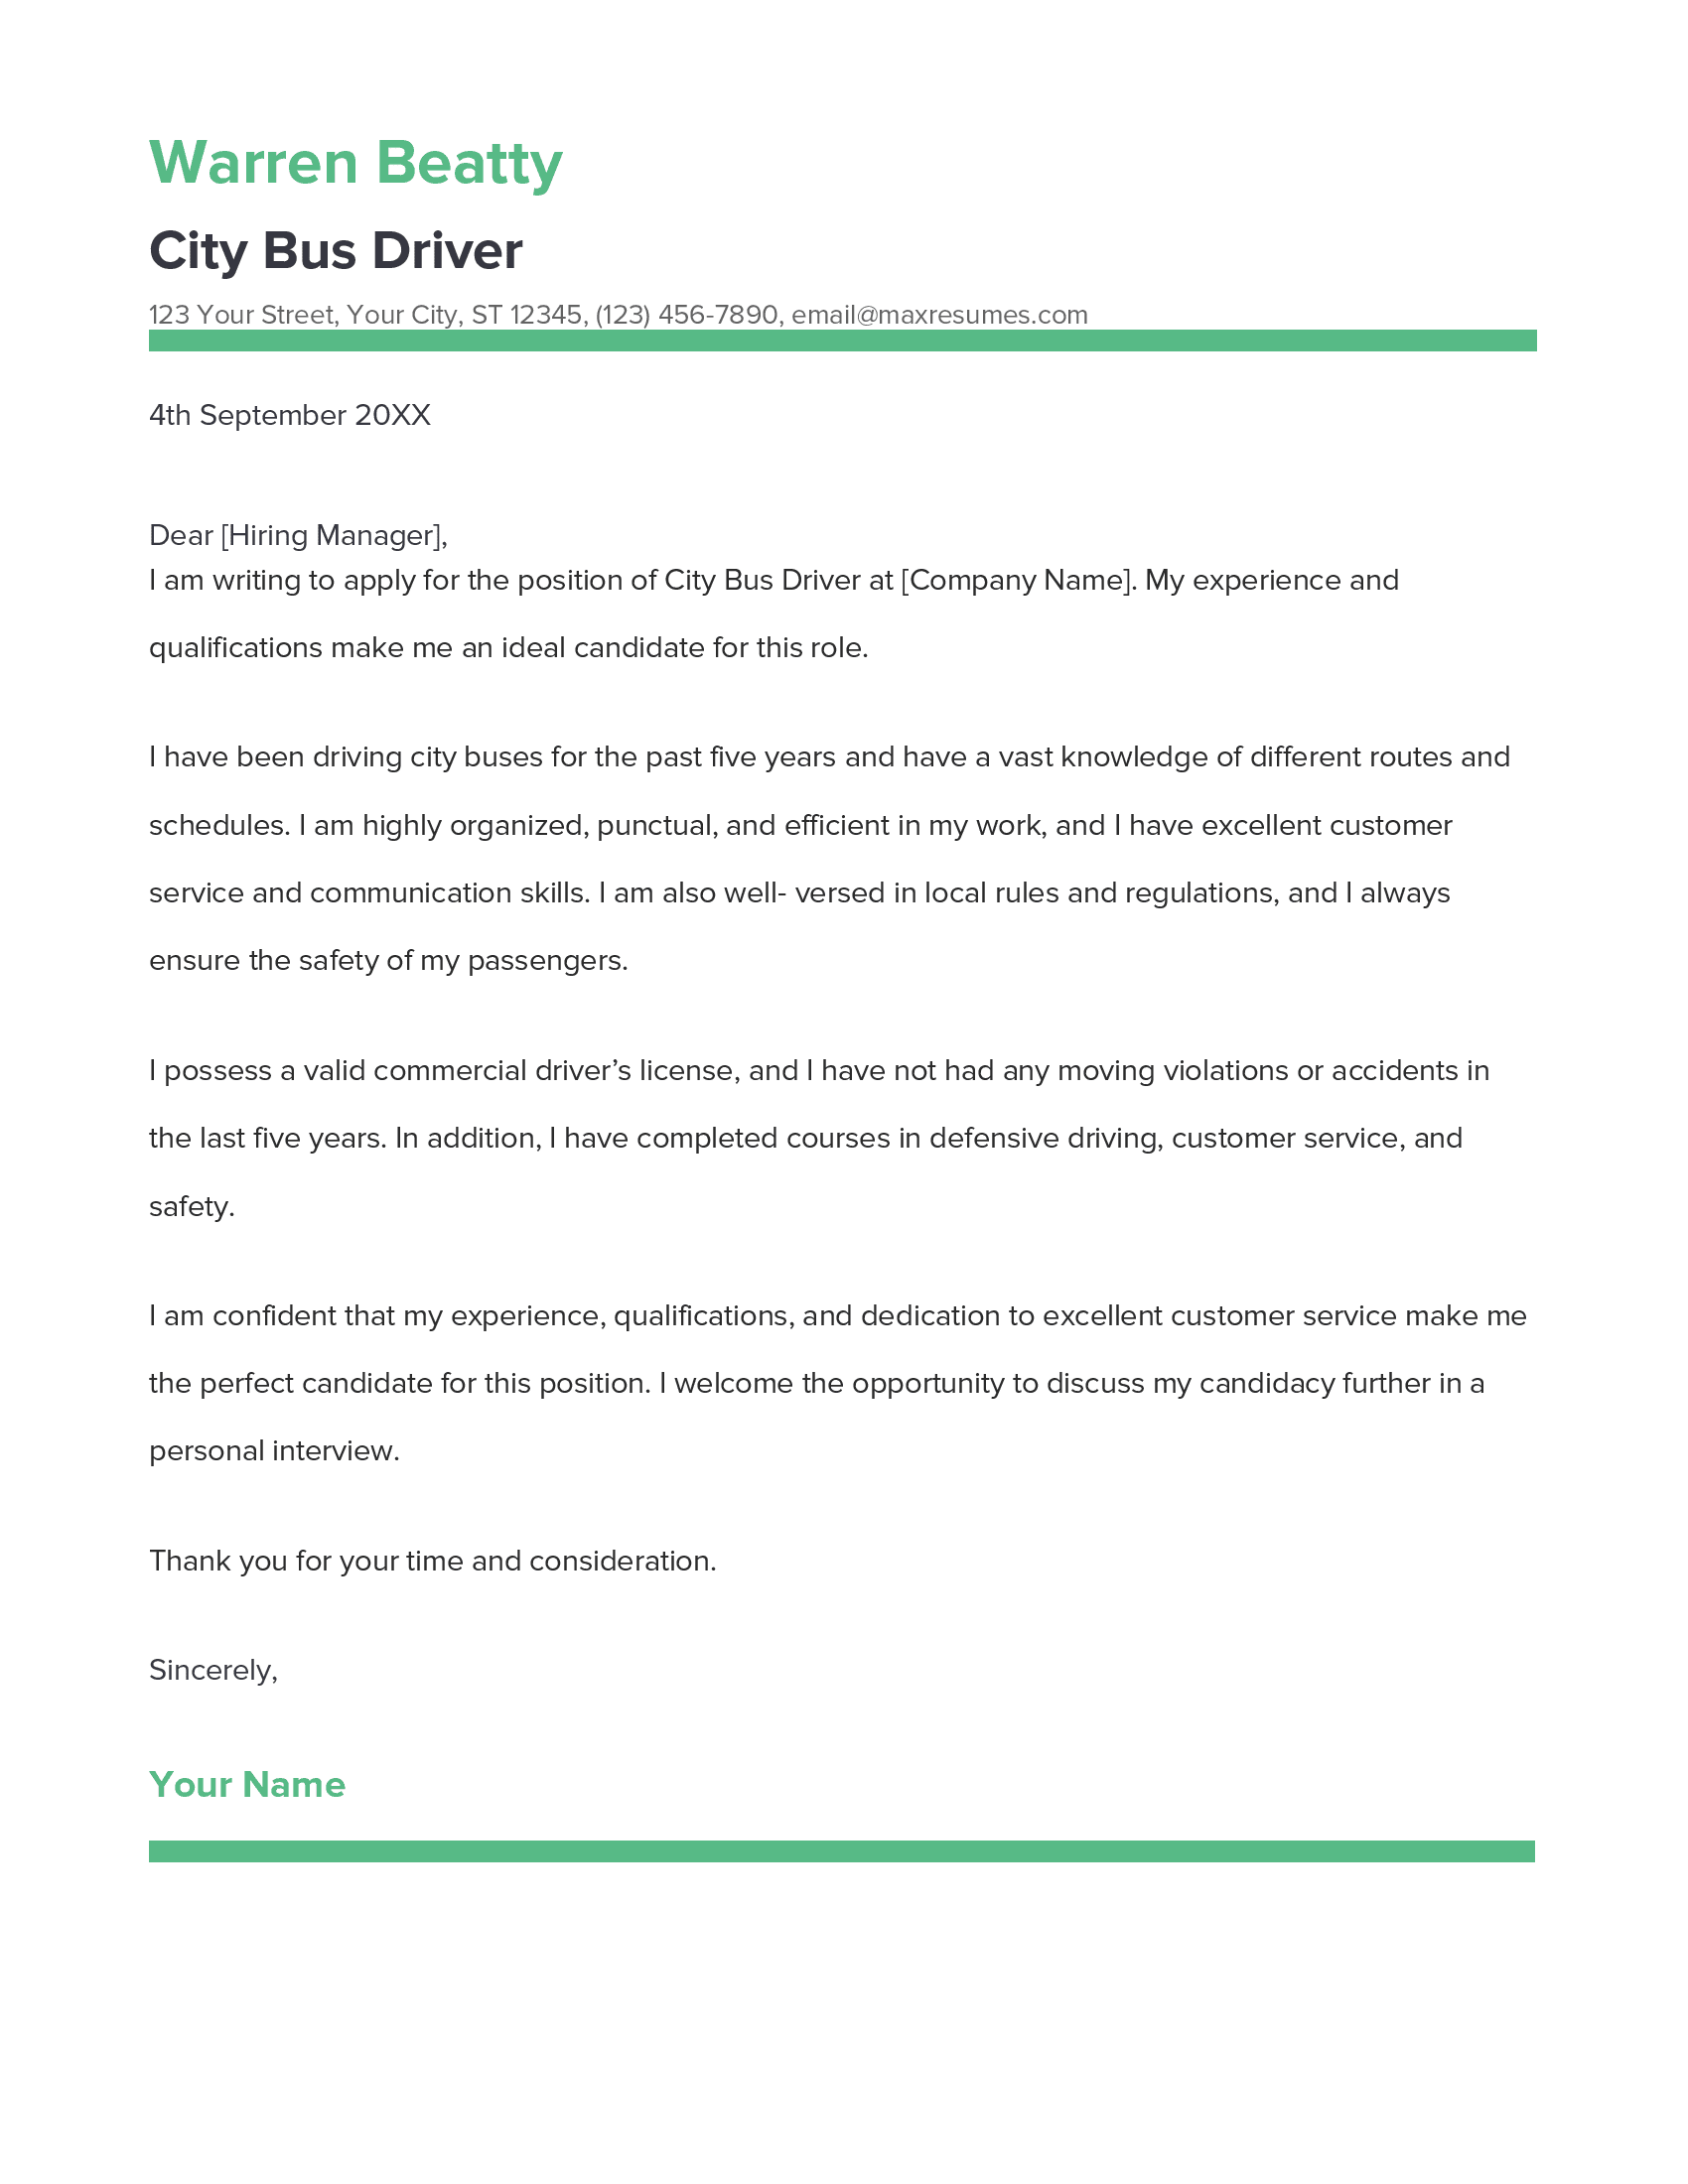 cover letter for city bus driver